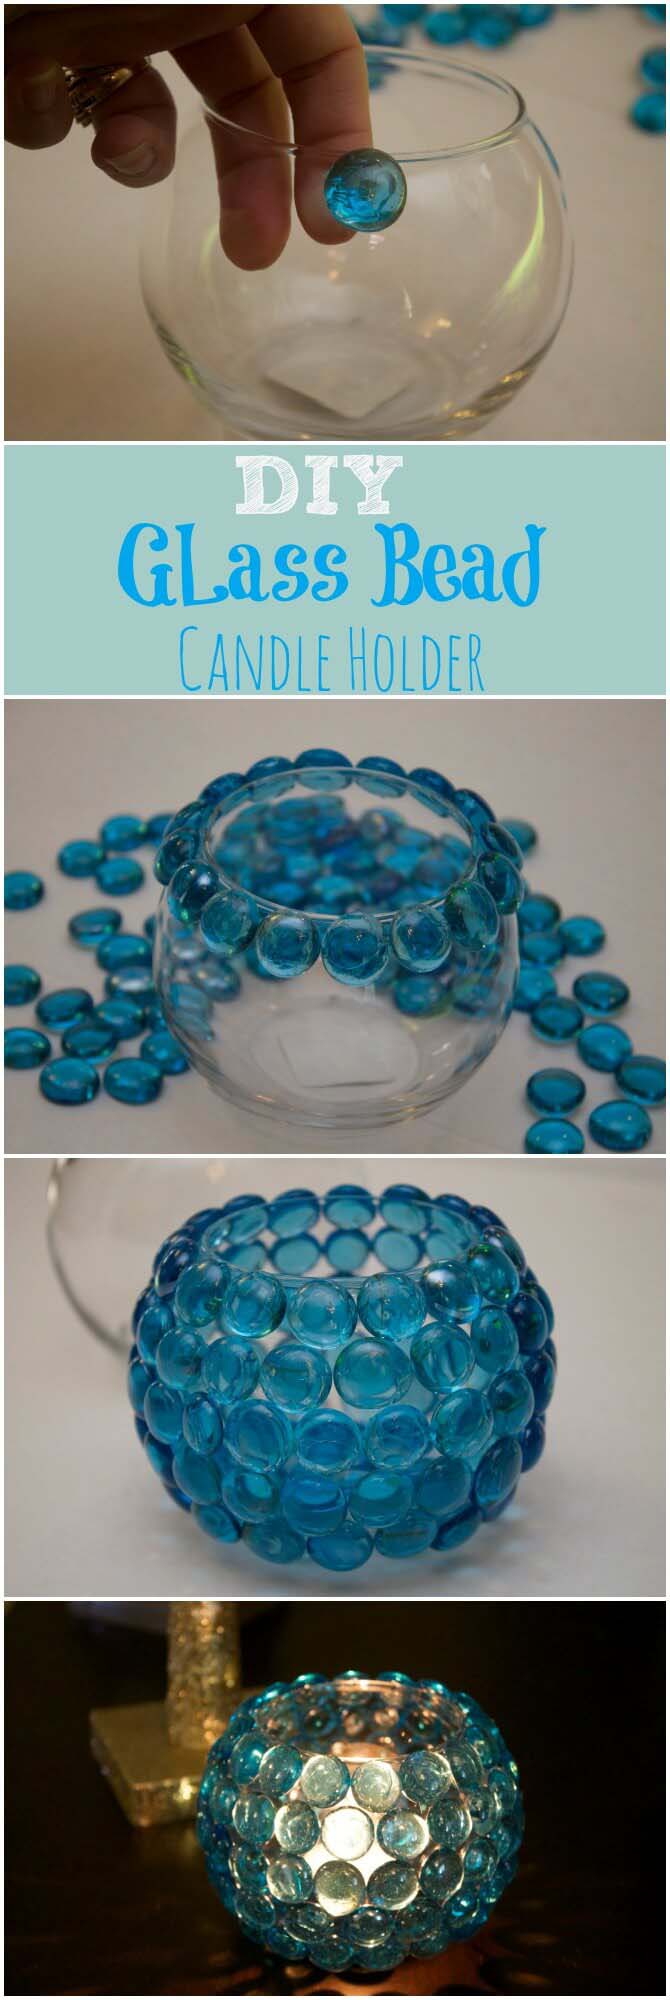 Candle Holder with Pretty Glass Gems #decorhomeideas